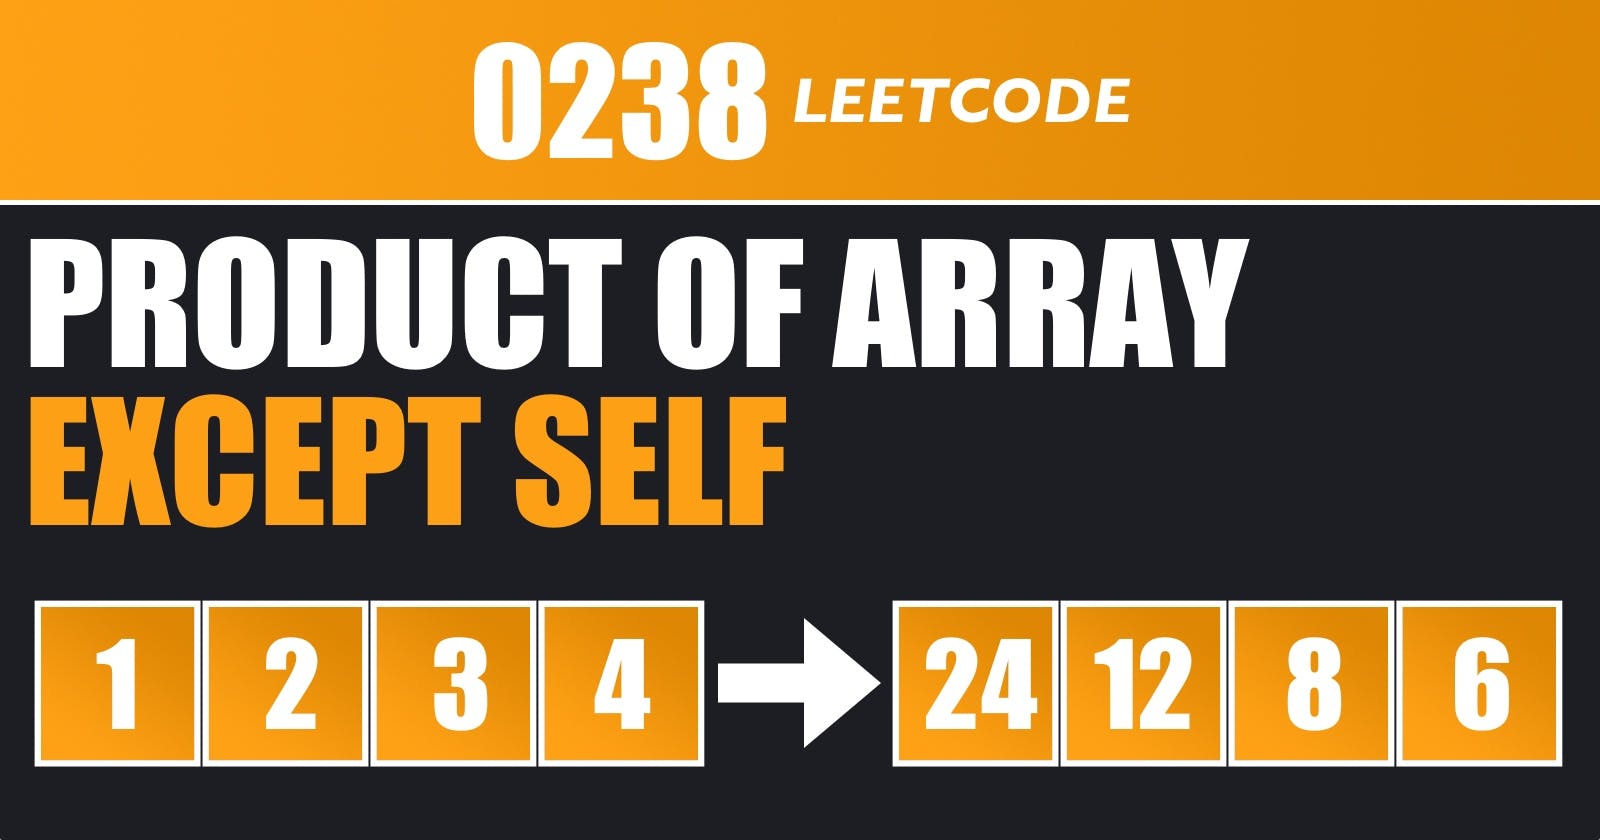 Product of Array Except Self - Leetcode 238